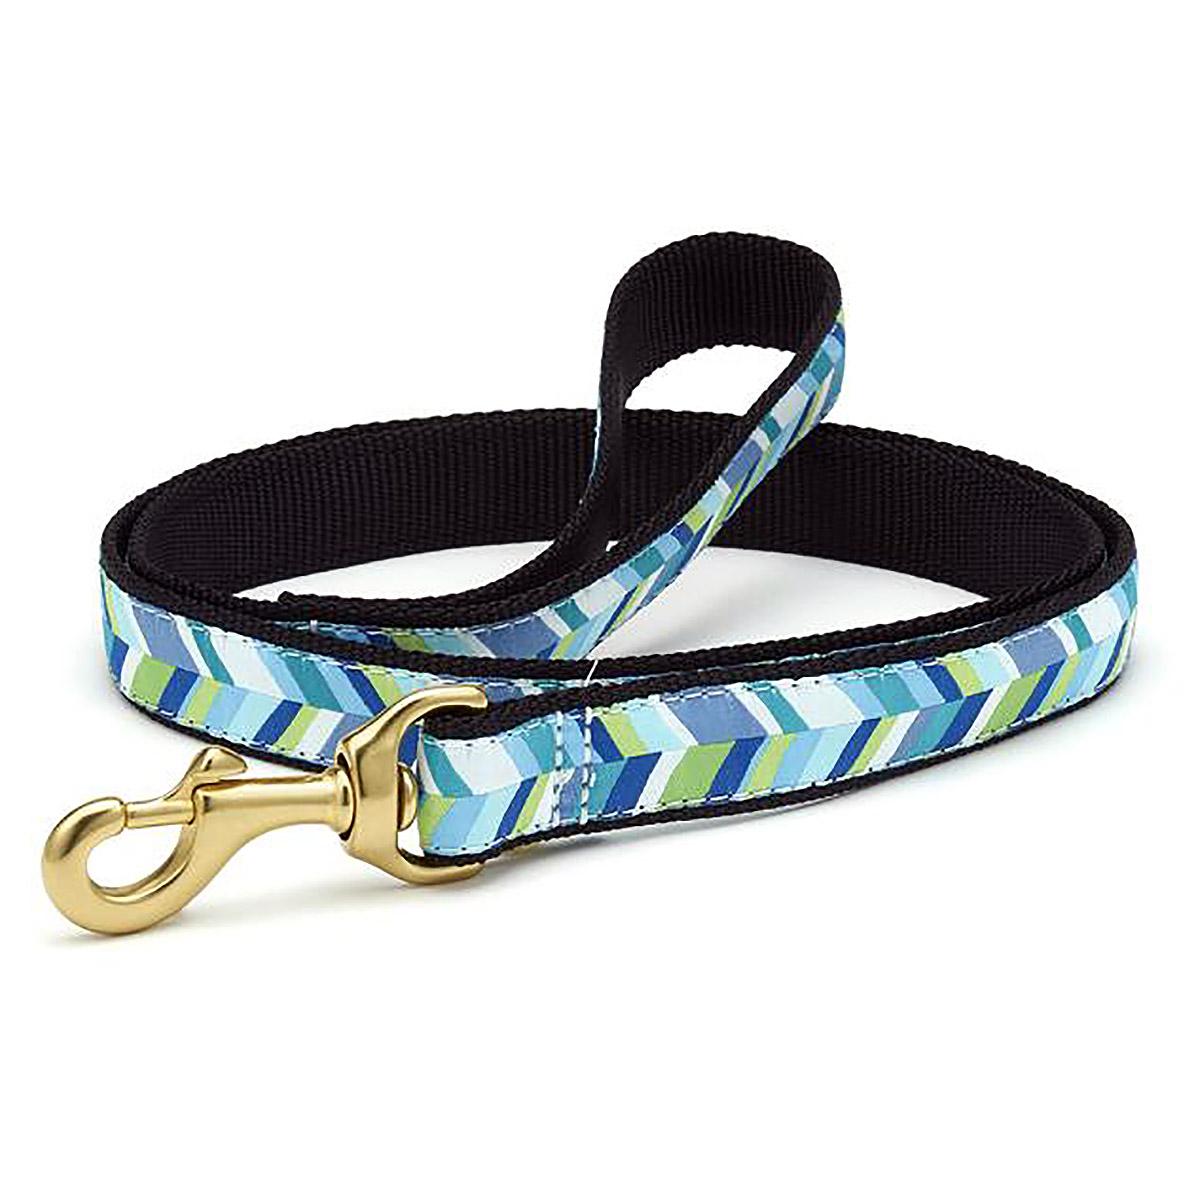 Good Vibrations Dog Leash by Up Country